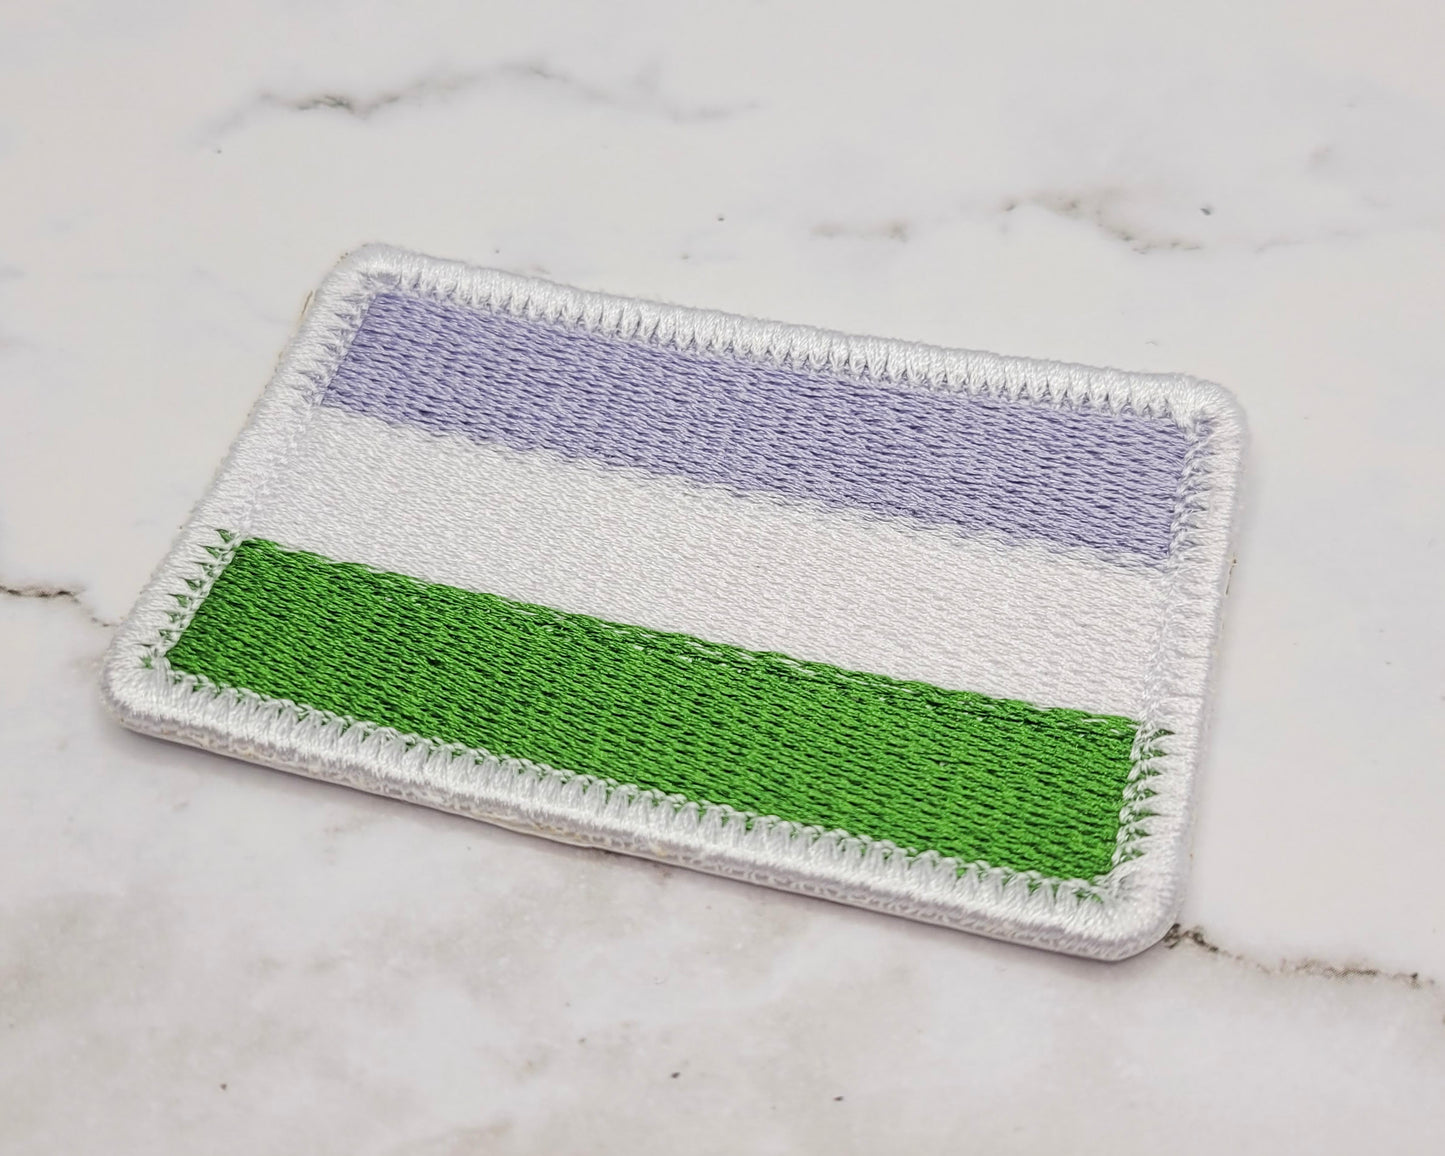 Genderqueer Pride Flag Patch & Pinback Button